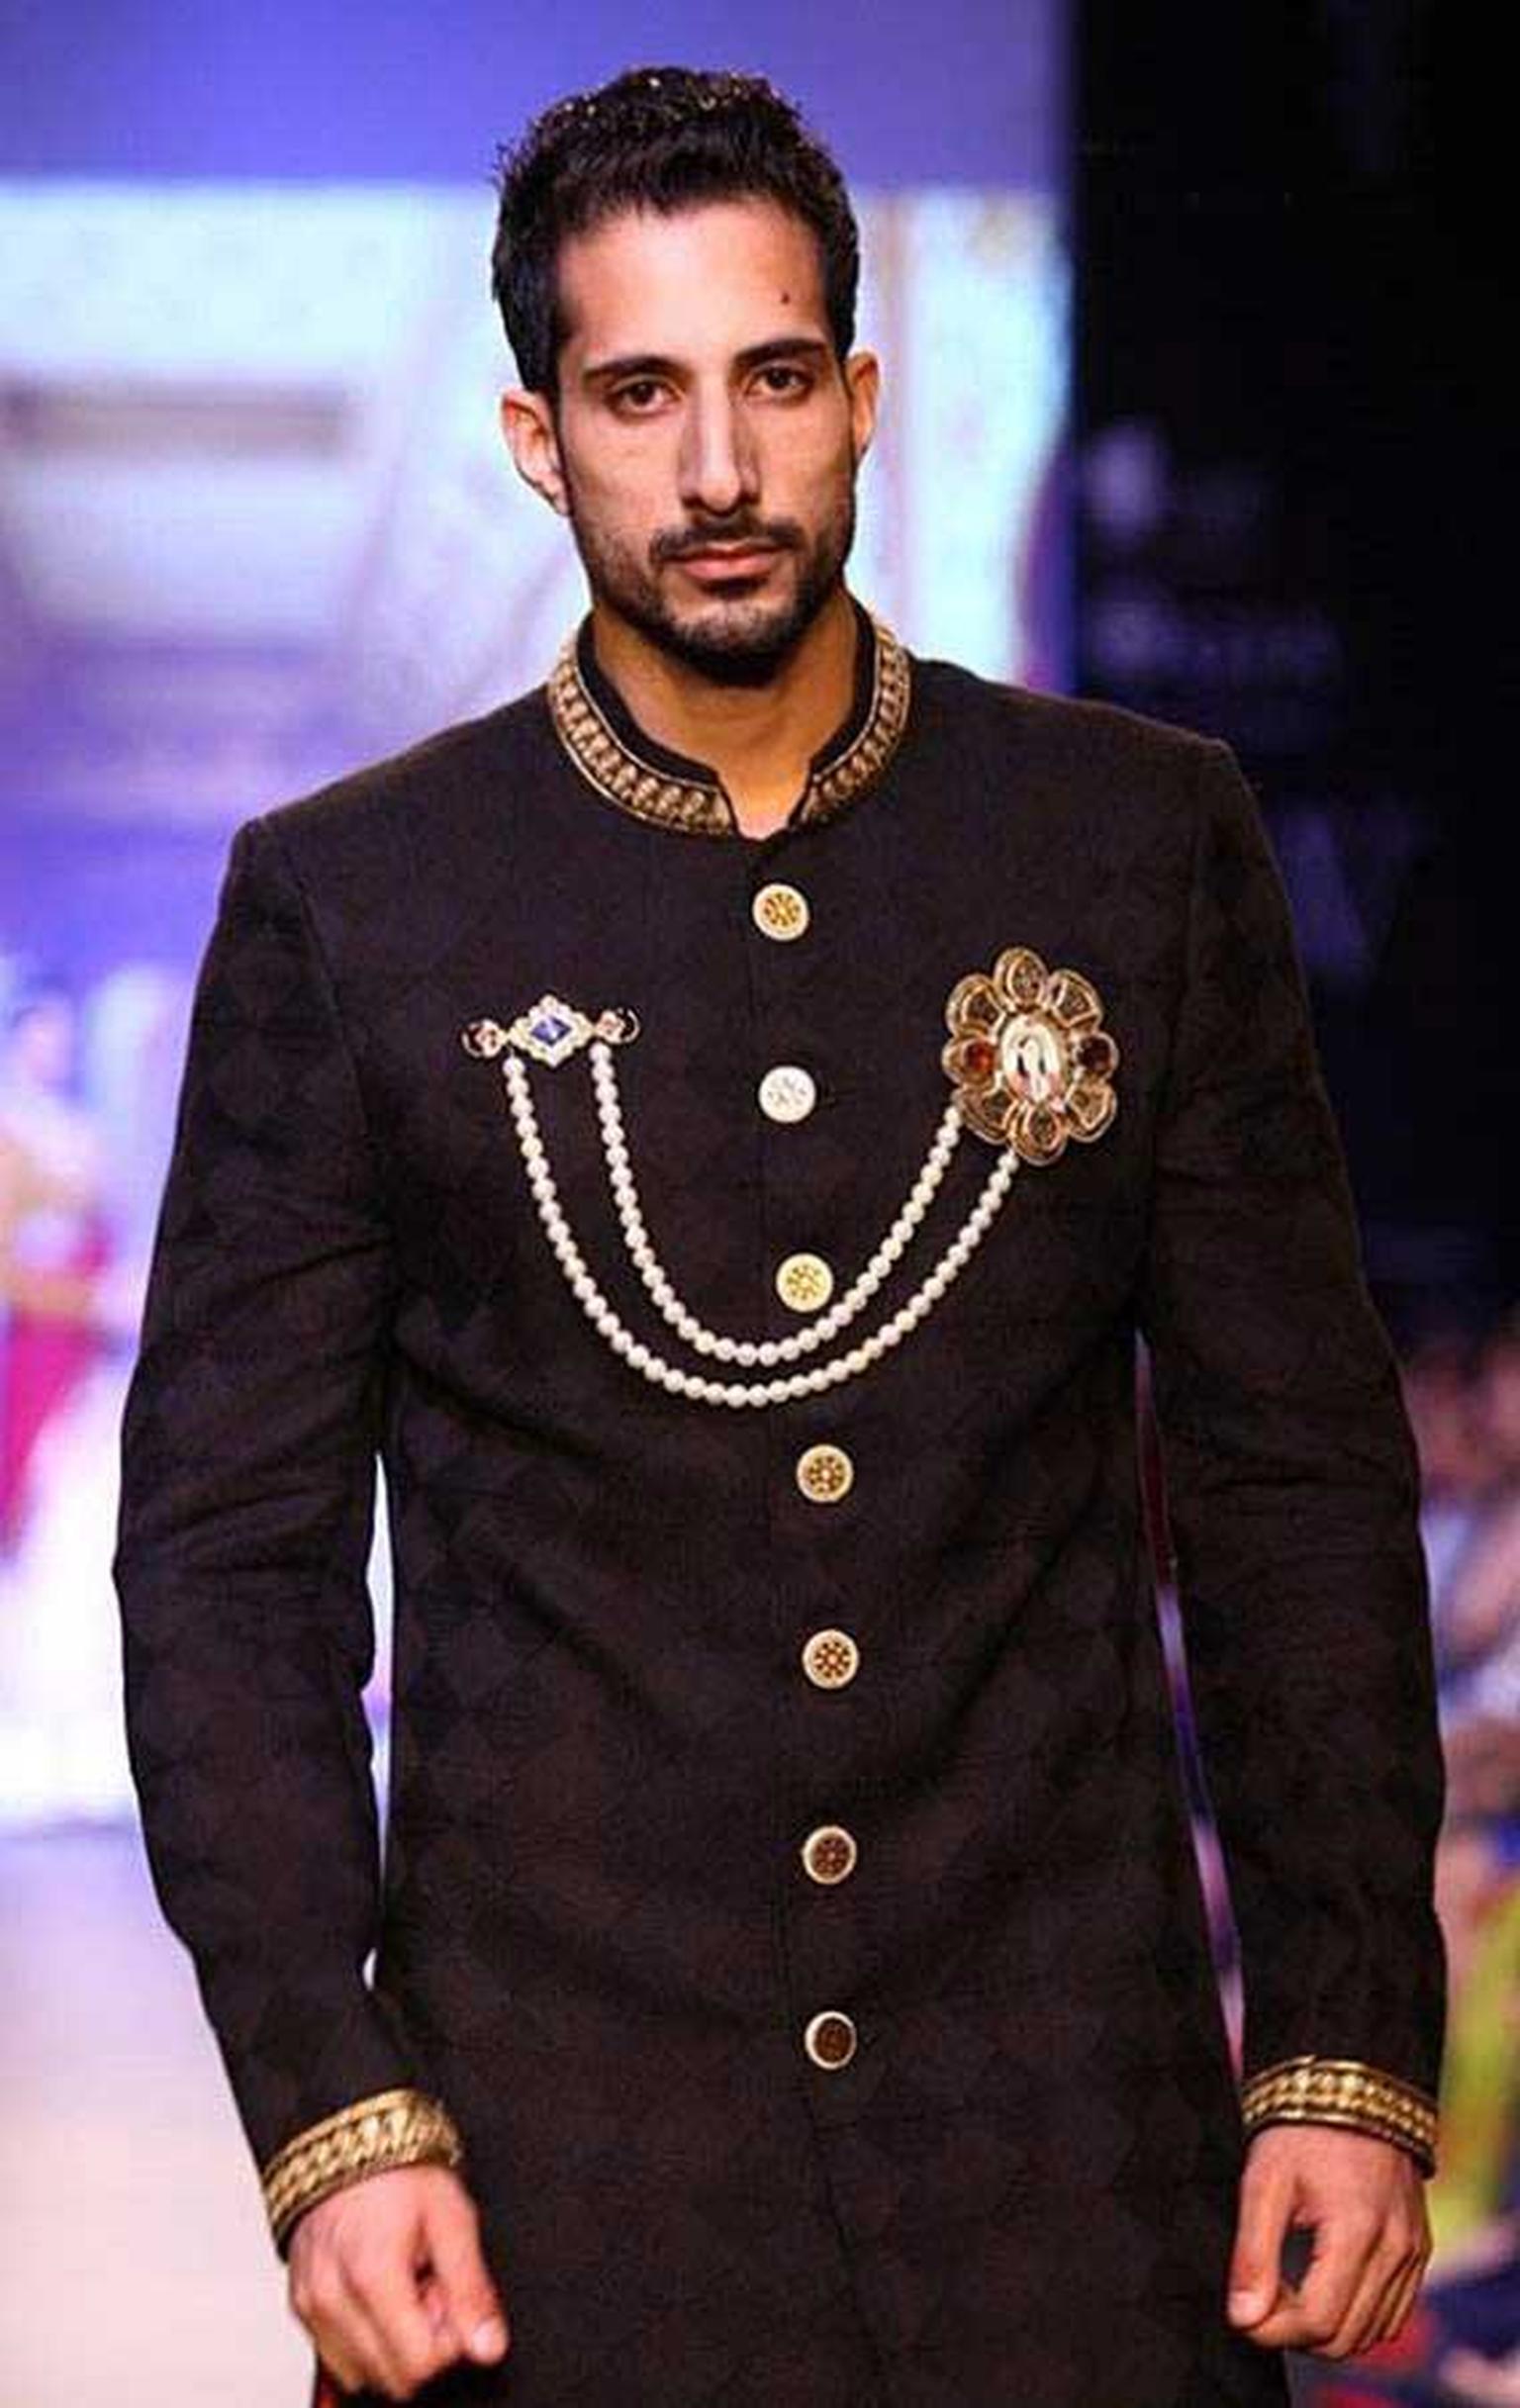 A model at IIJW 2013 wearing Golecha jewels, including jewelled kurta buttons and an elaborate brooch.